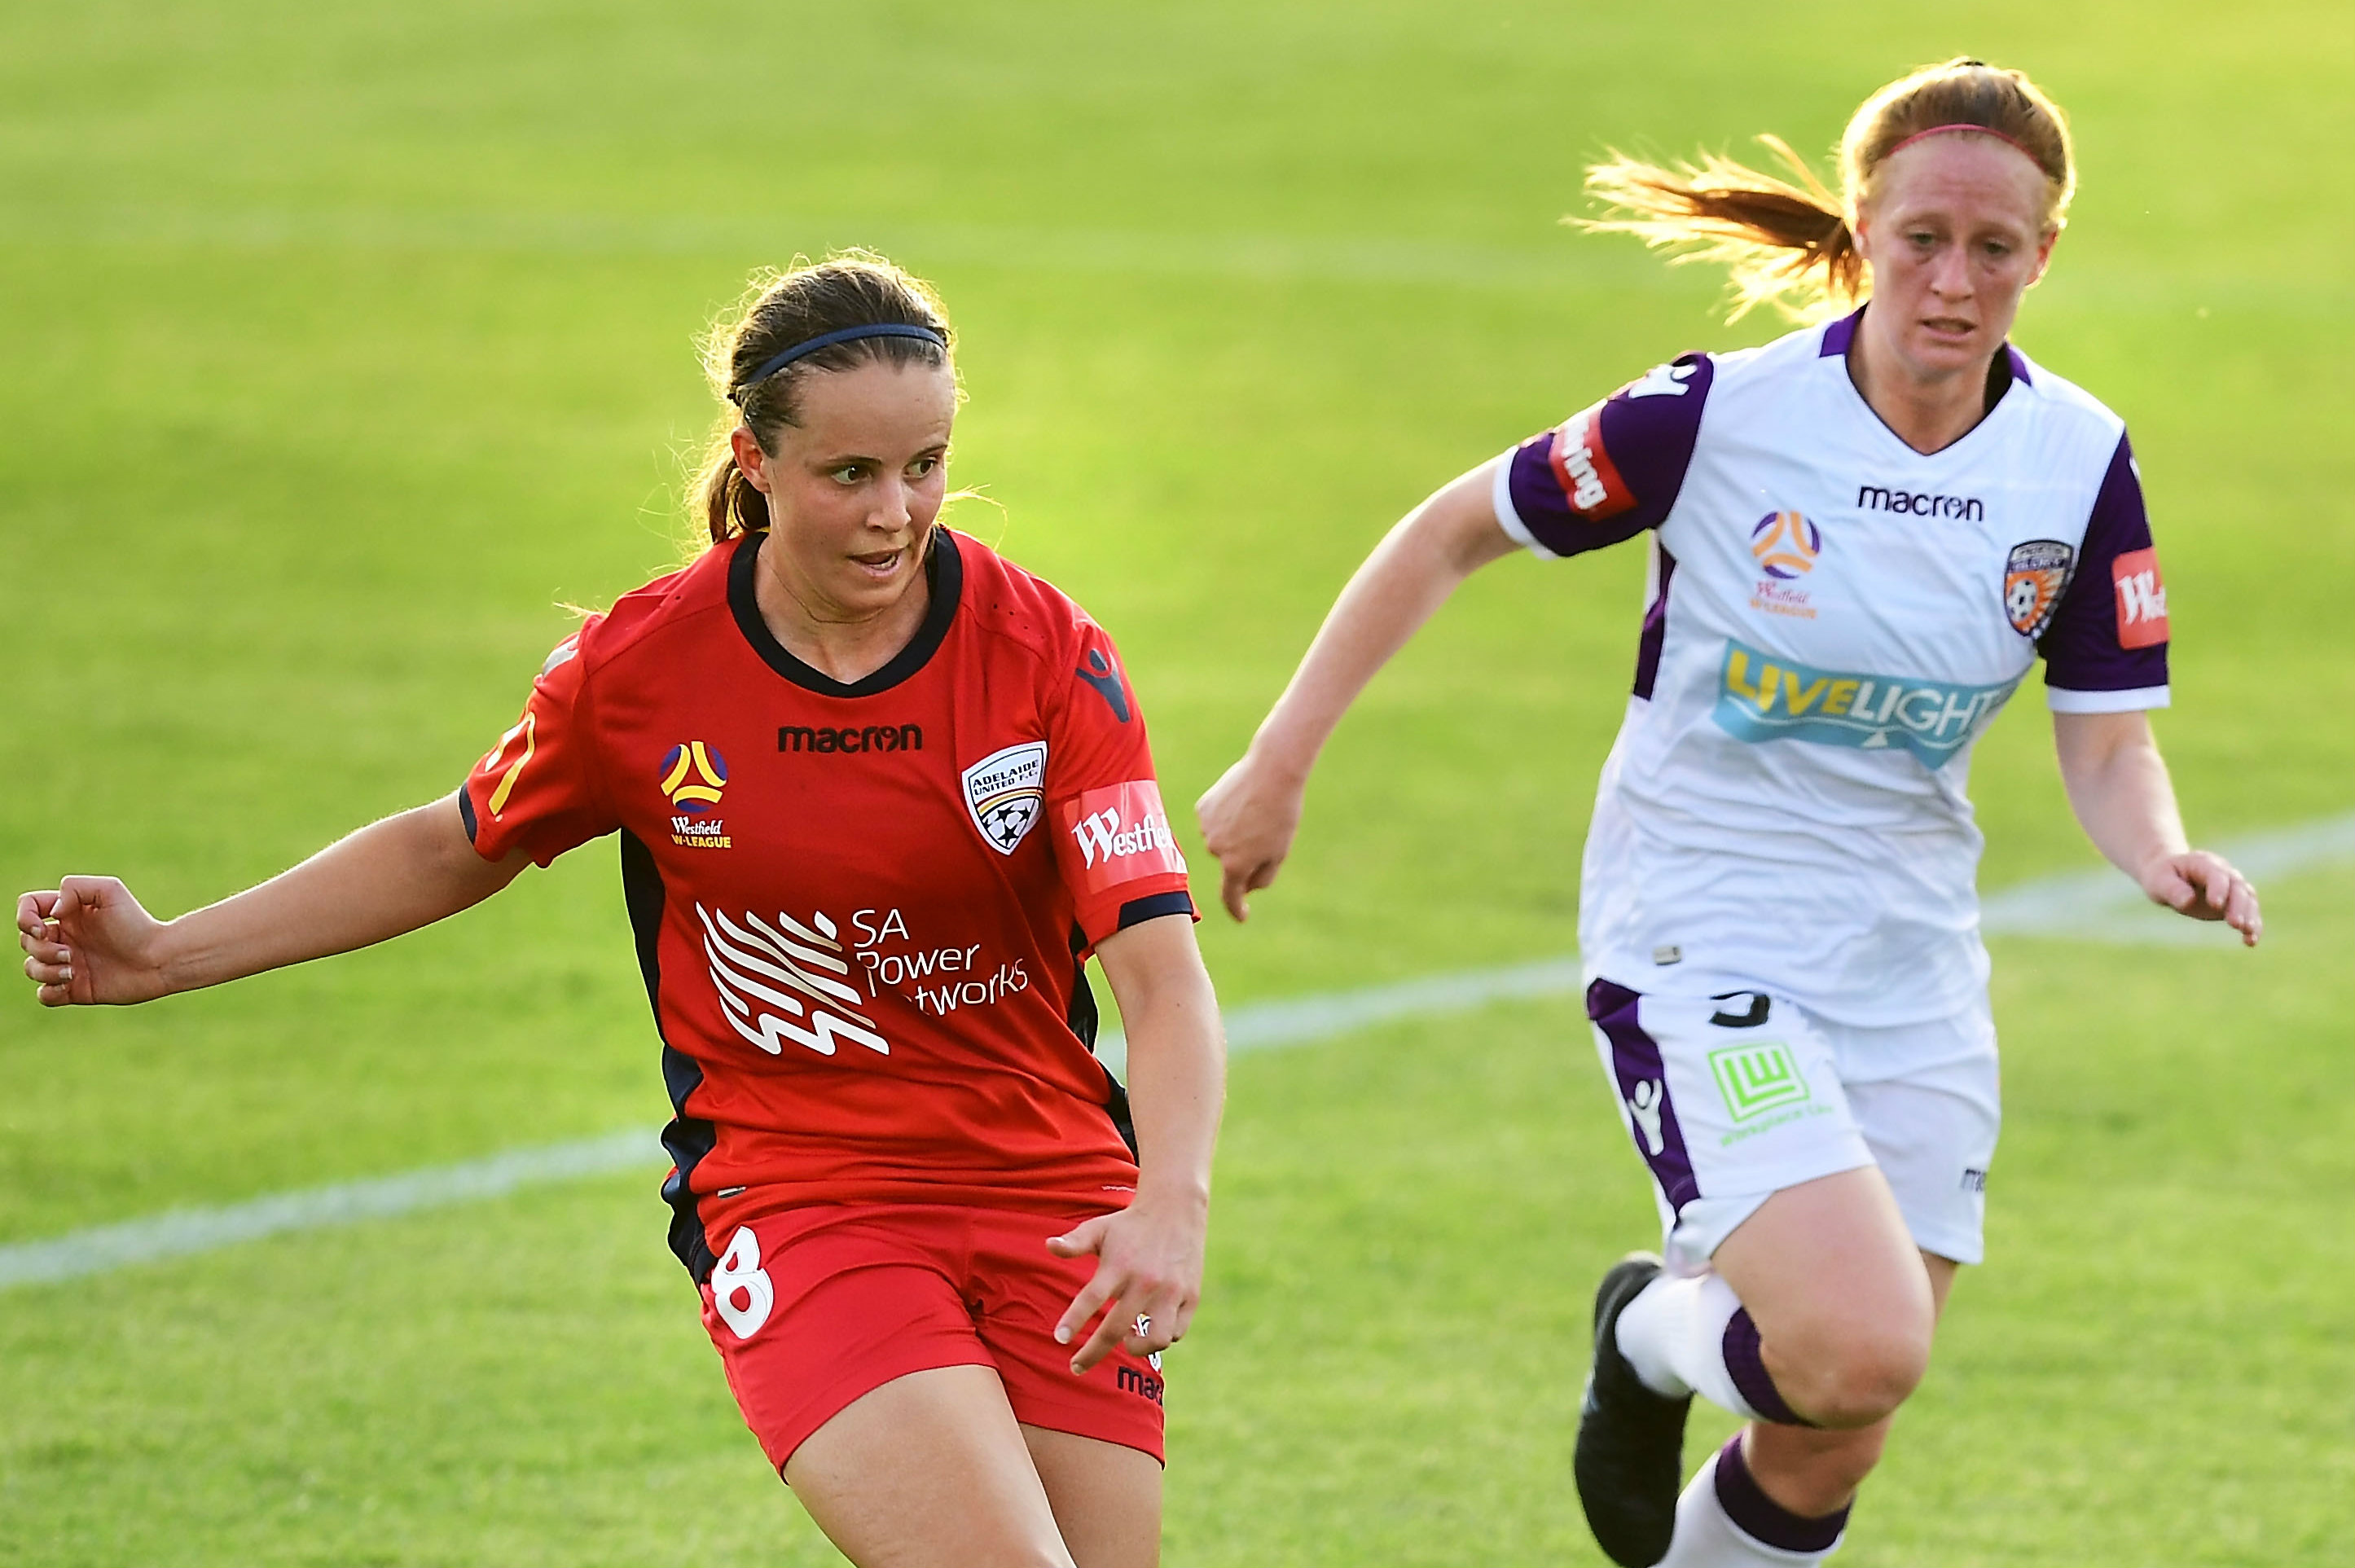 Emily Condon is heading into a seventh season with Adelaide United